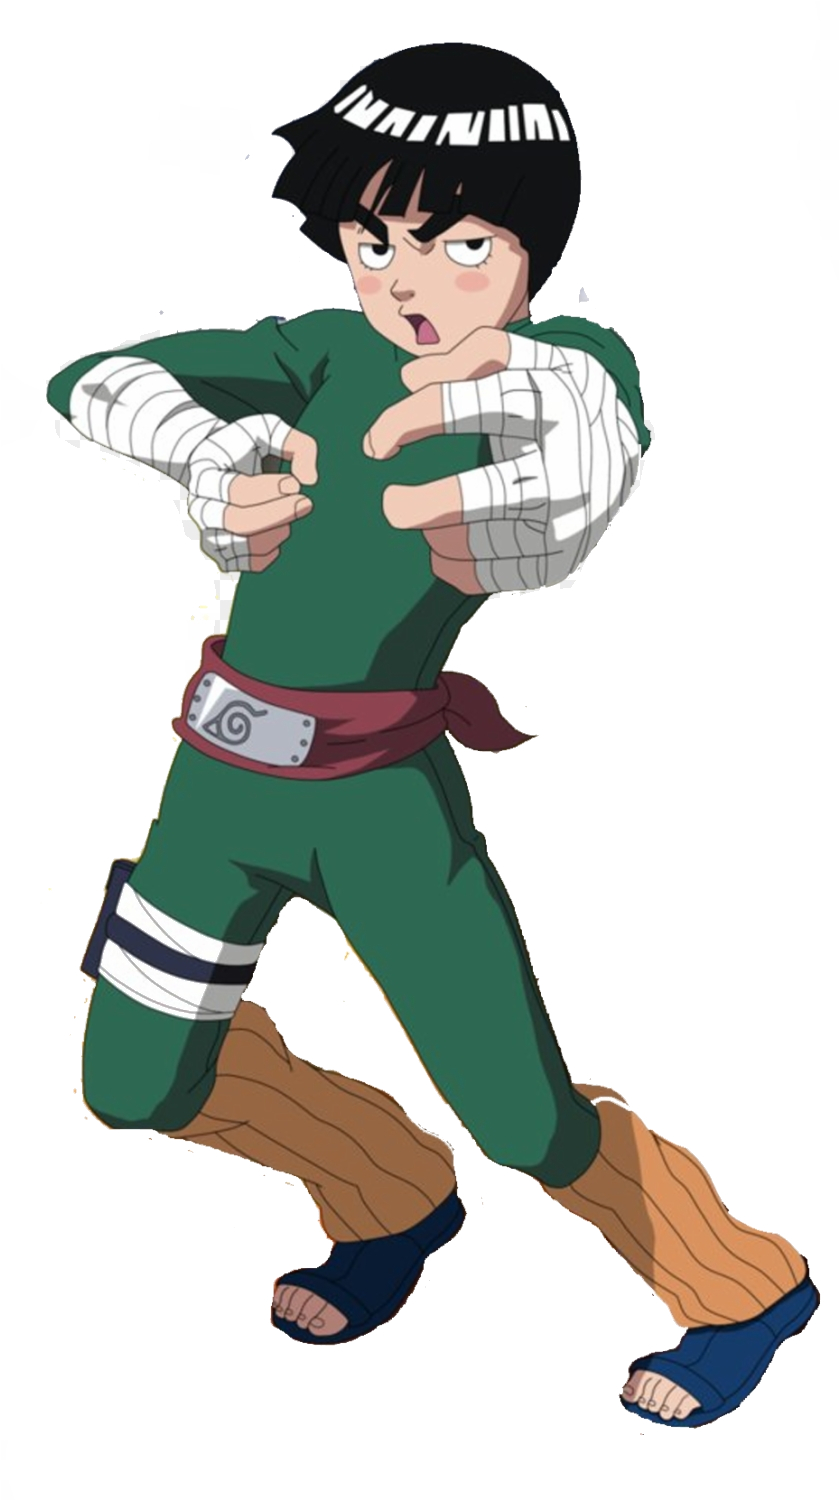 Anime Embroidery Pattern Rock Lee Drunk - A.G.E Store patterns